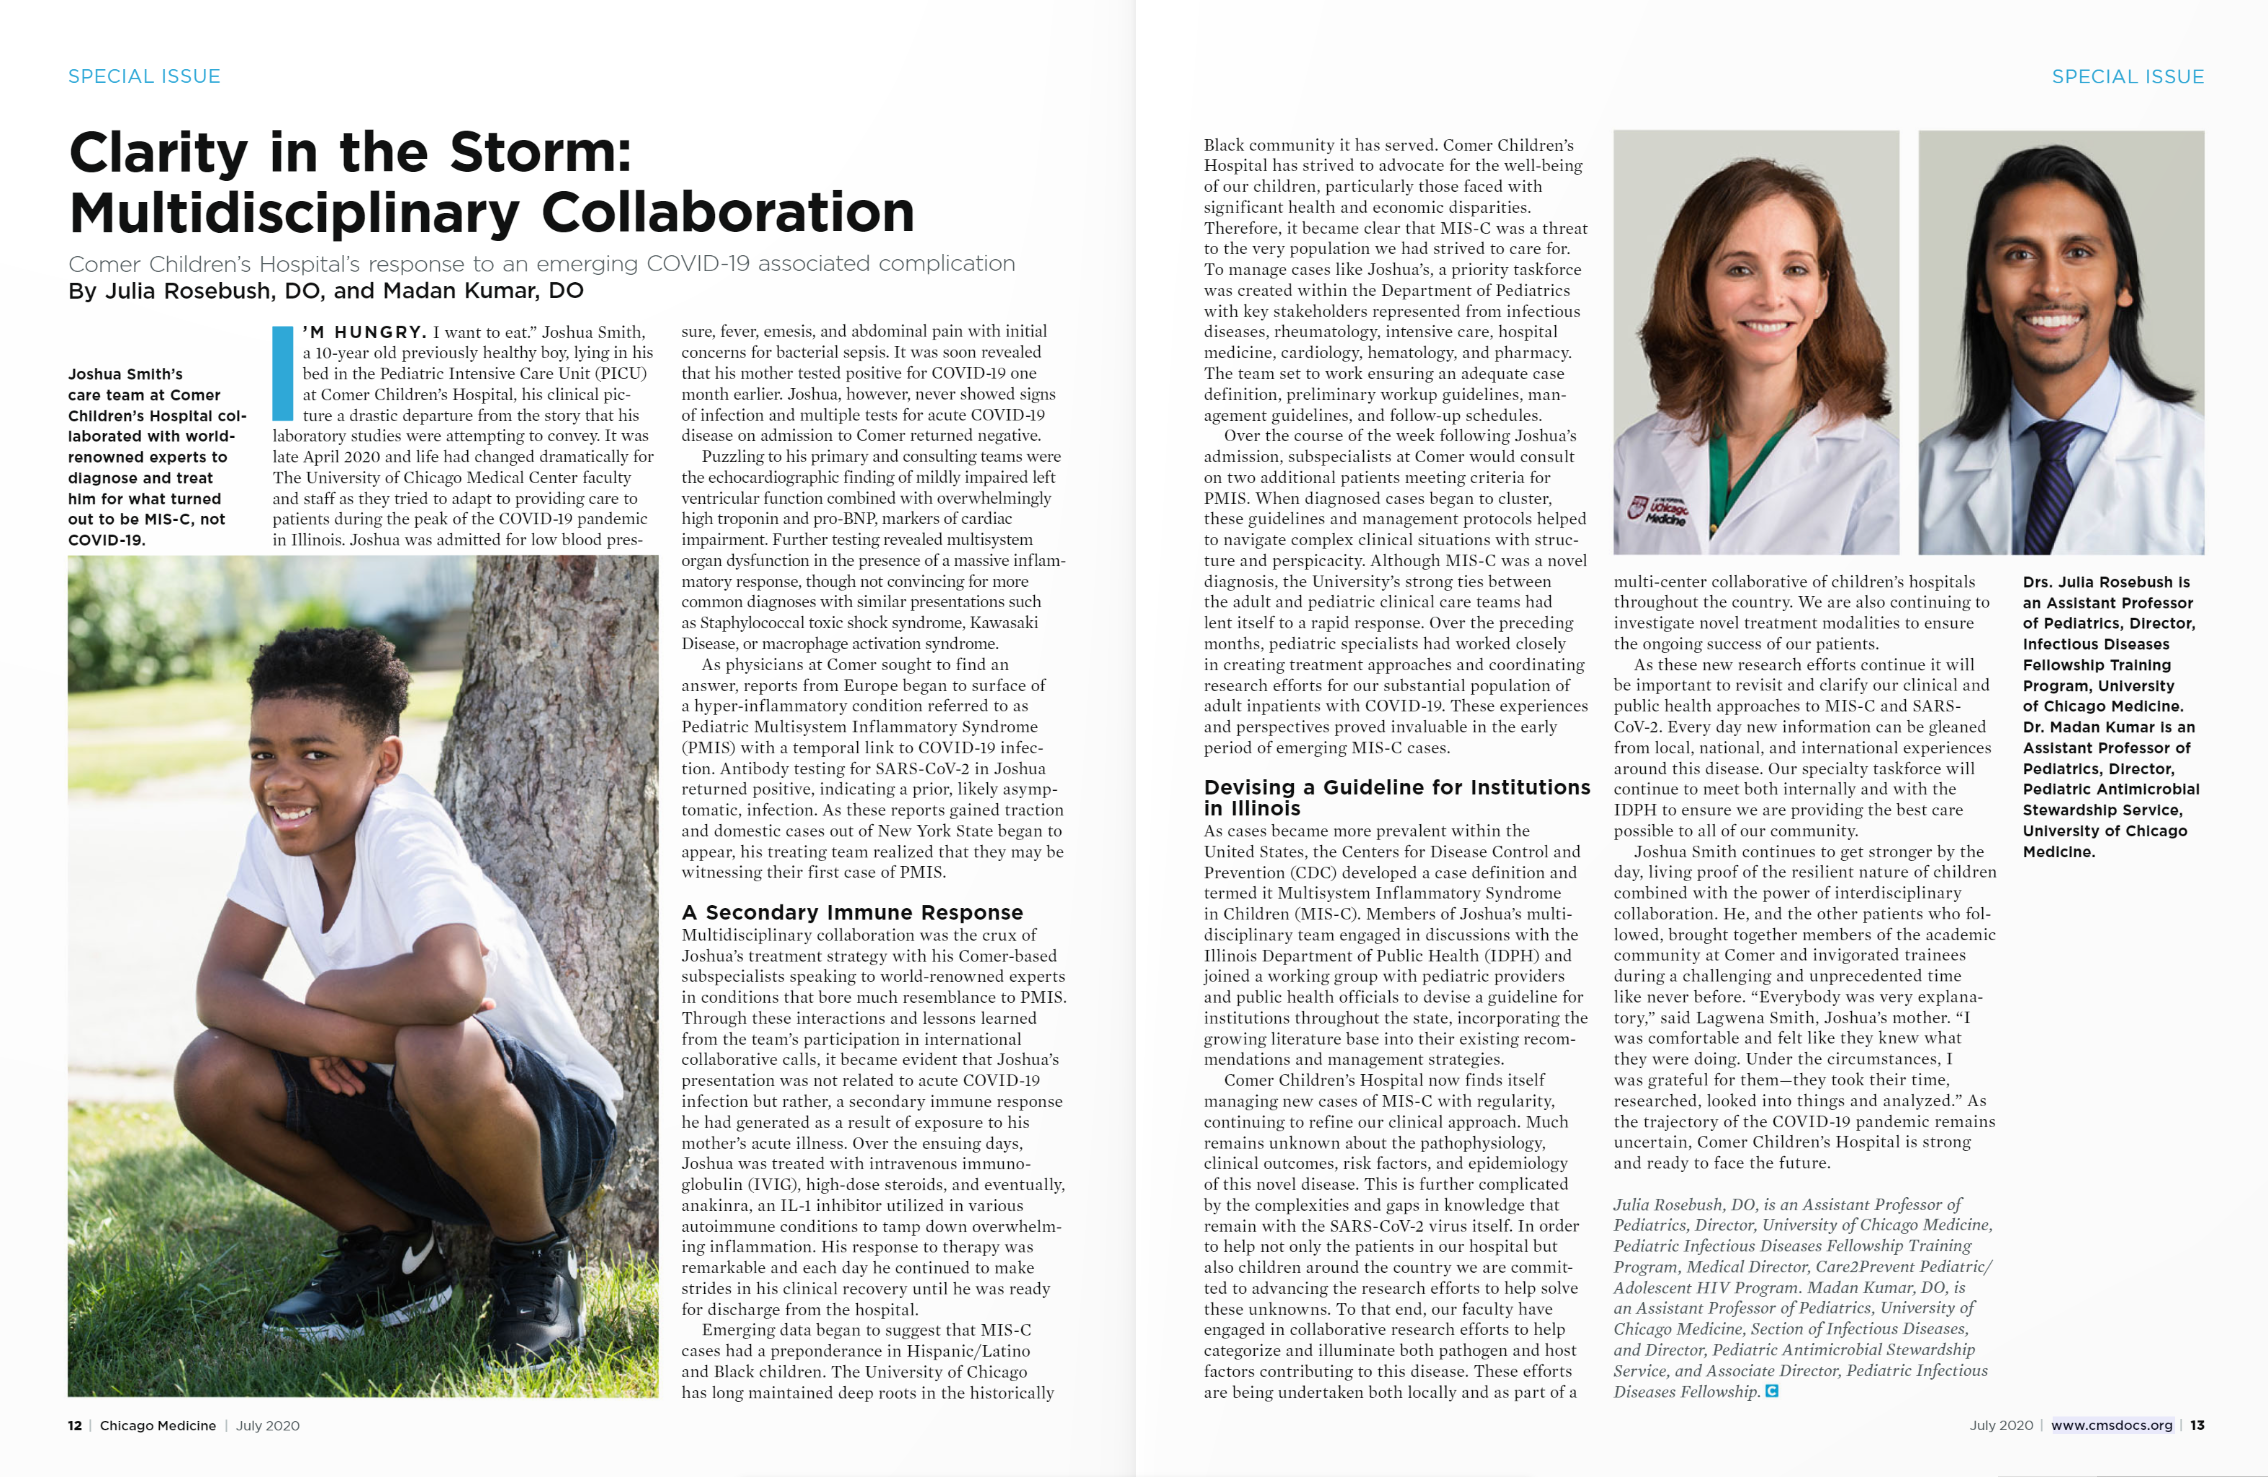 Clarity in the Storm: Multidisciplinary Collaboration